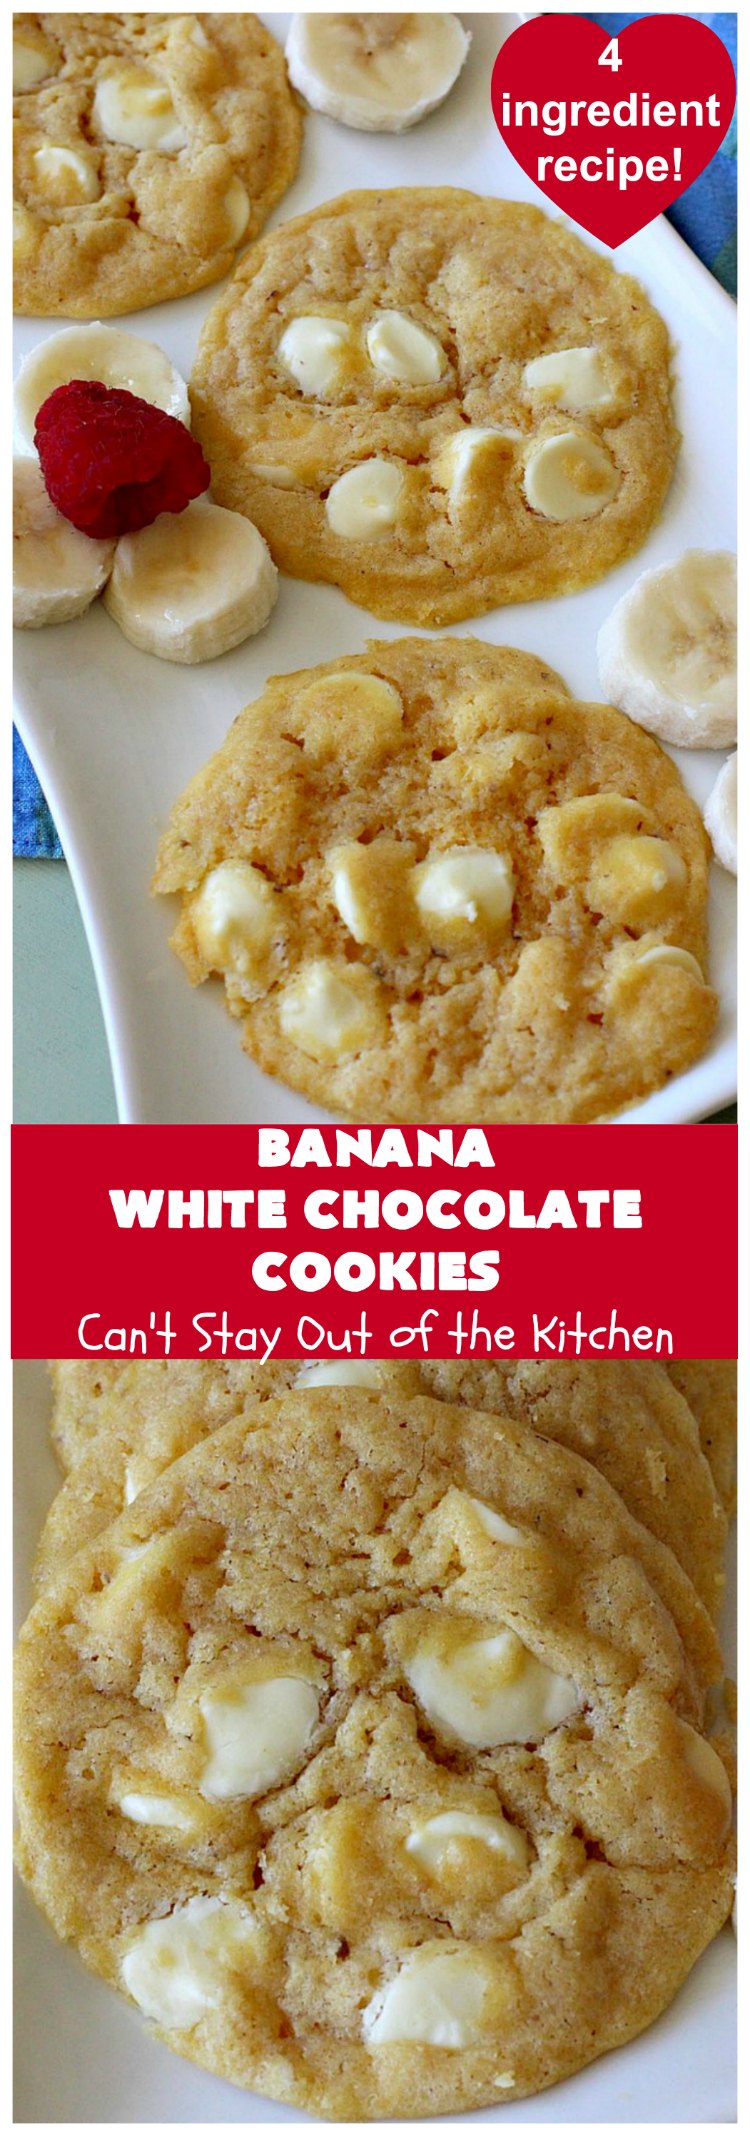 Banana White Chocolate Cookies | Can't Stay Out of the Kitchen